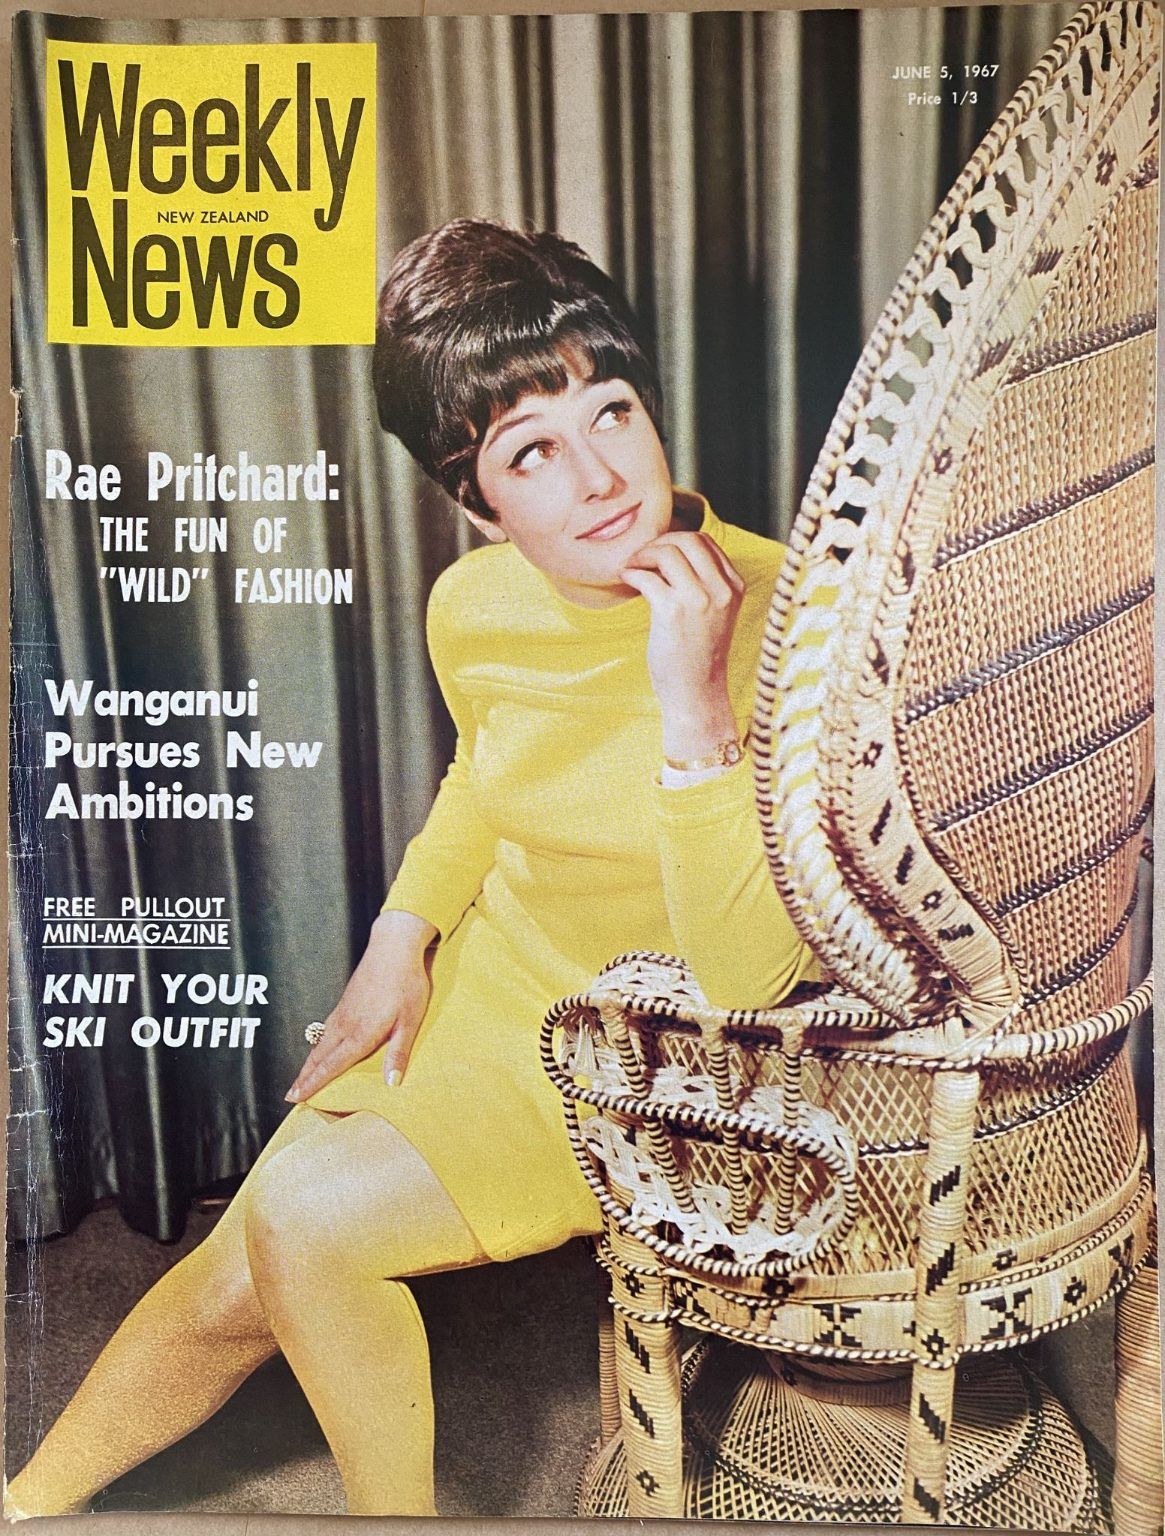 OLD NEWSPAPER: New Zealand Weekly News, No. 5401, 5 June 1967